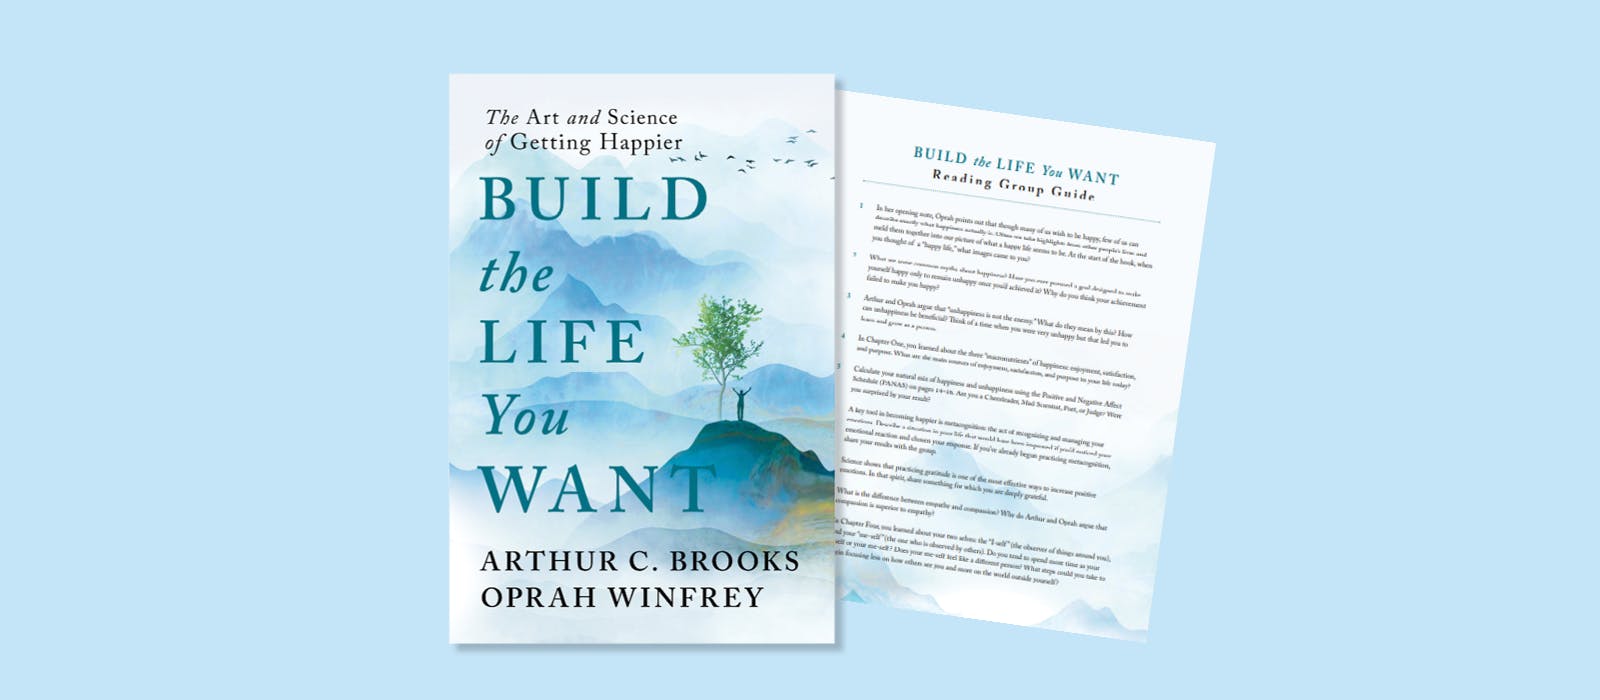 Build The Life You Want Book Club Guide